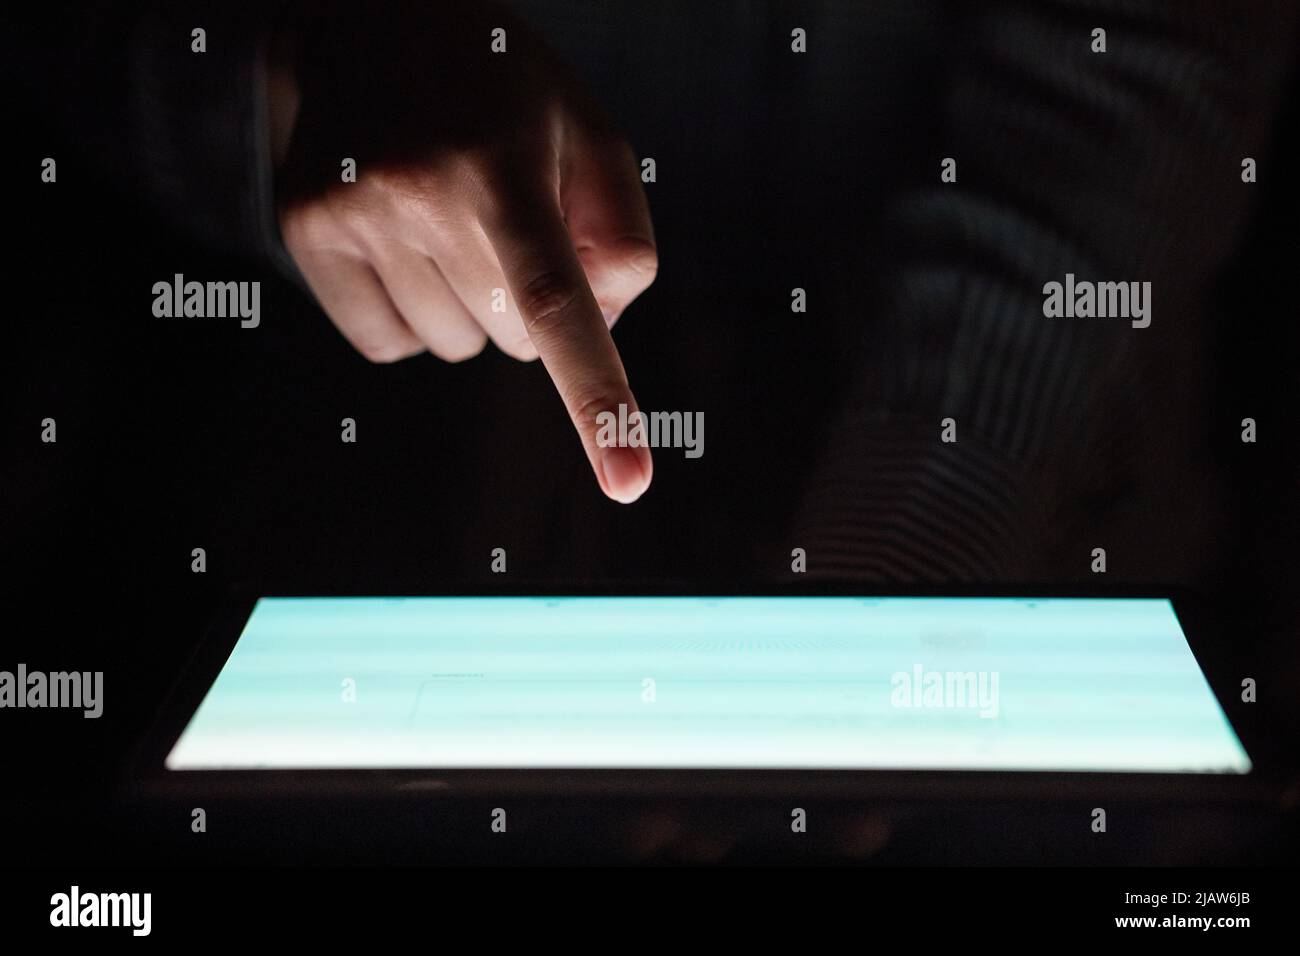 hand technology tablet computer communication screen digital internet holding glowing light pointing finger Stock Photo